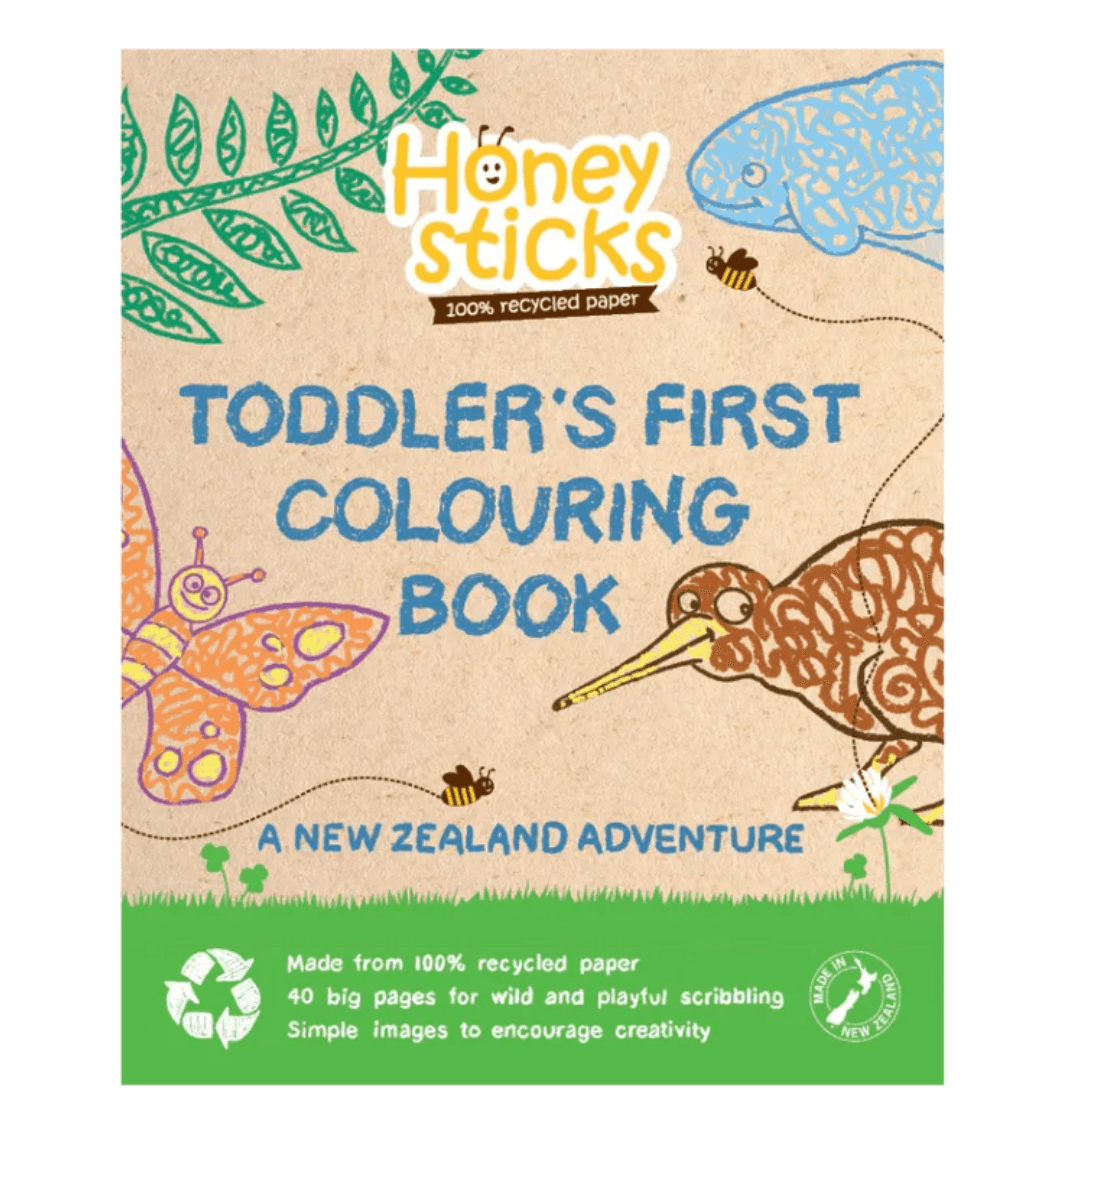 Toddlers First Colouring Book - A Kiwi Adventure - Taylorson